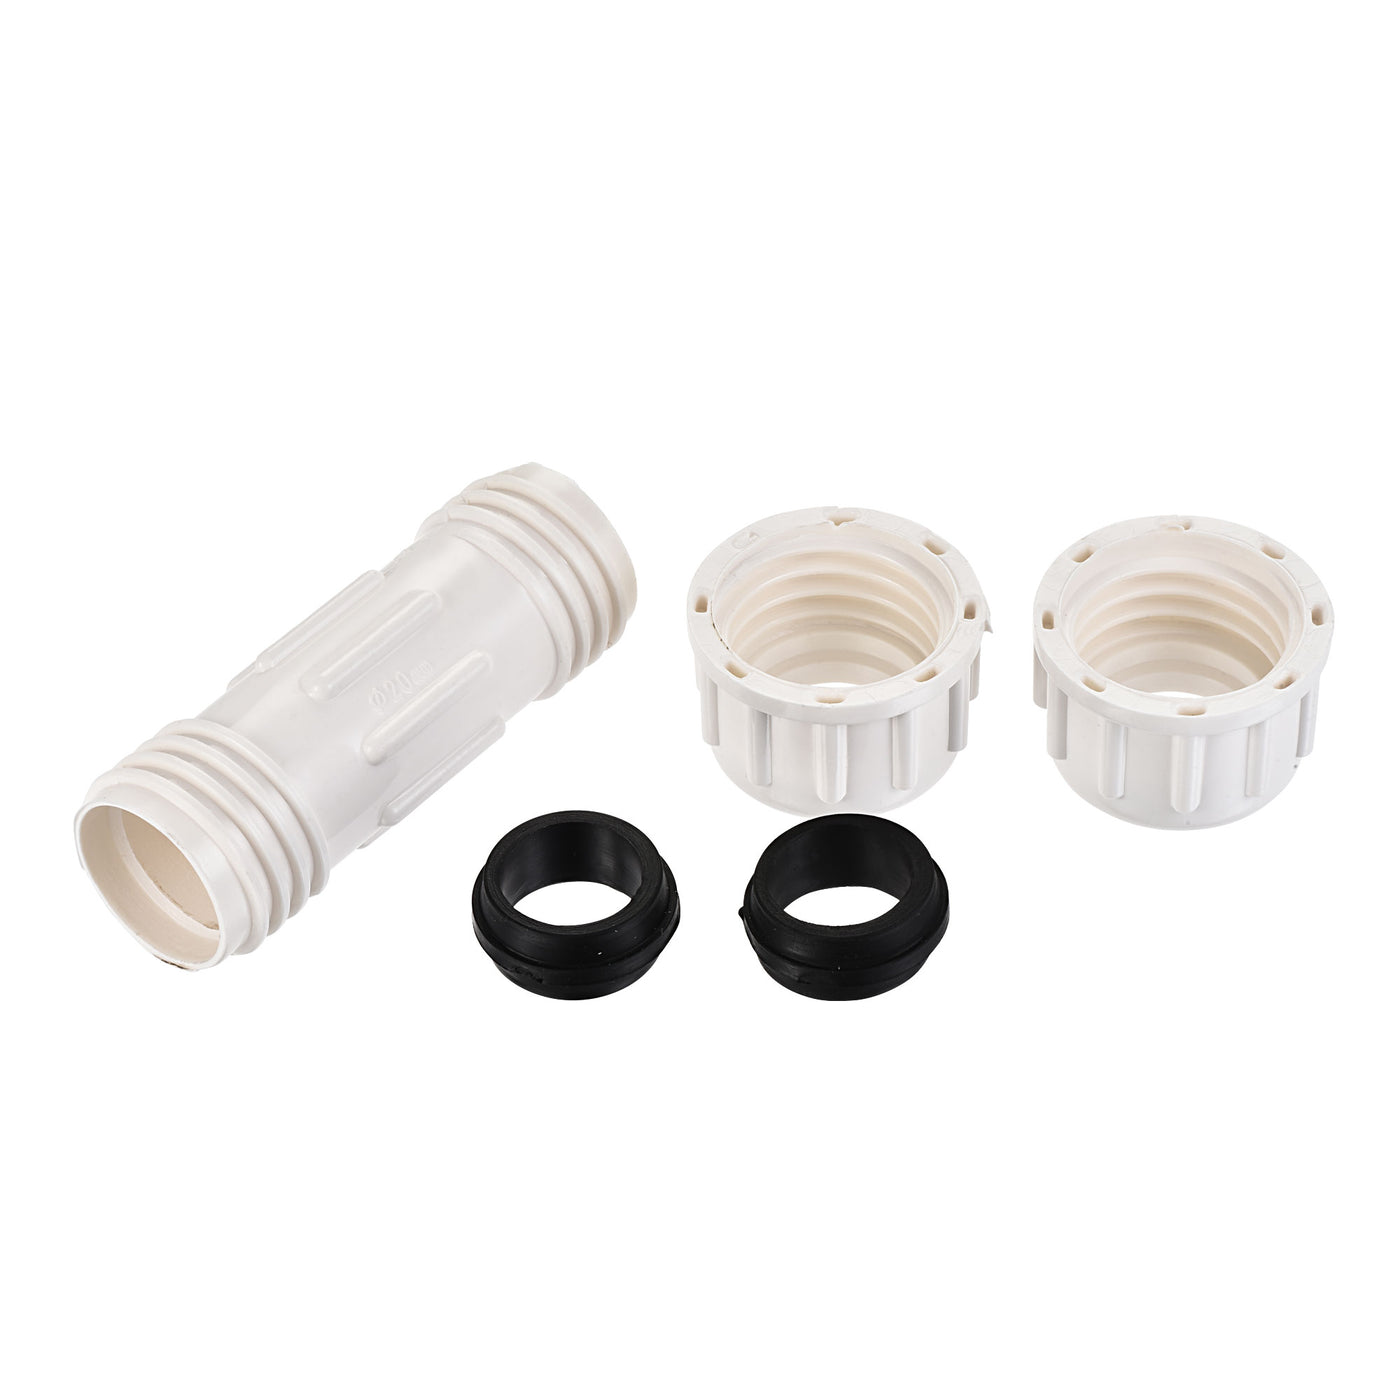 Uxcell Uxcell PVC Compression Plumbing Coupling Straight Pipe Fitting Extension 63mm White